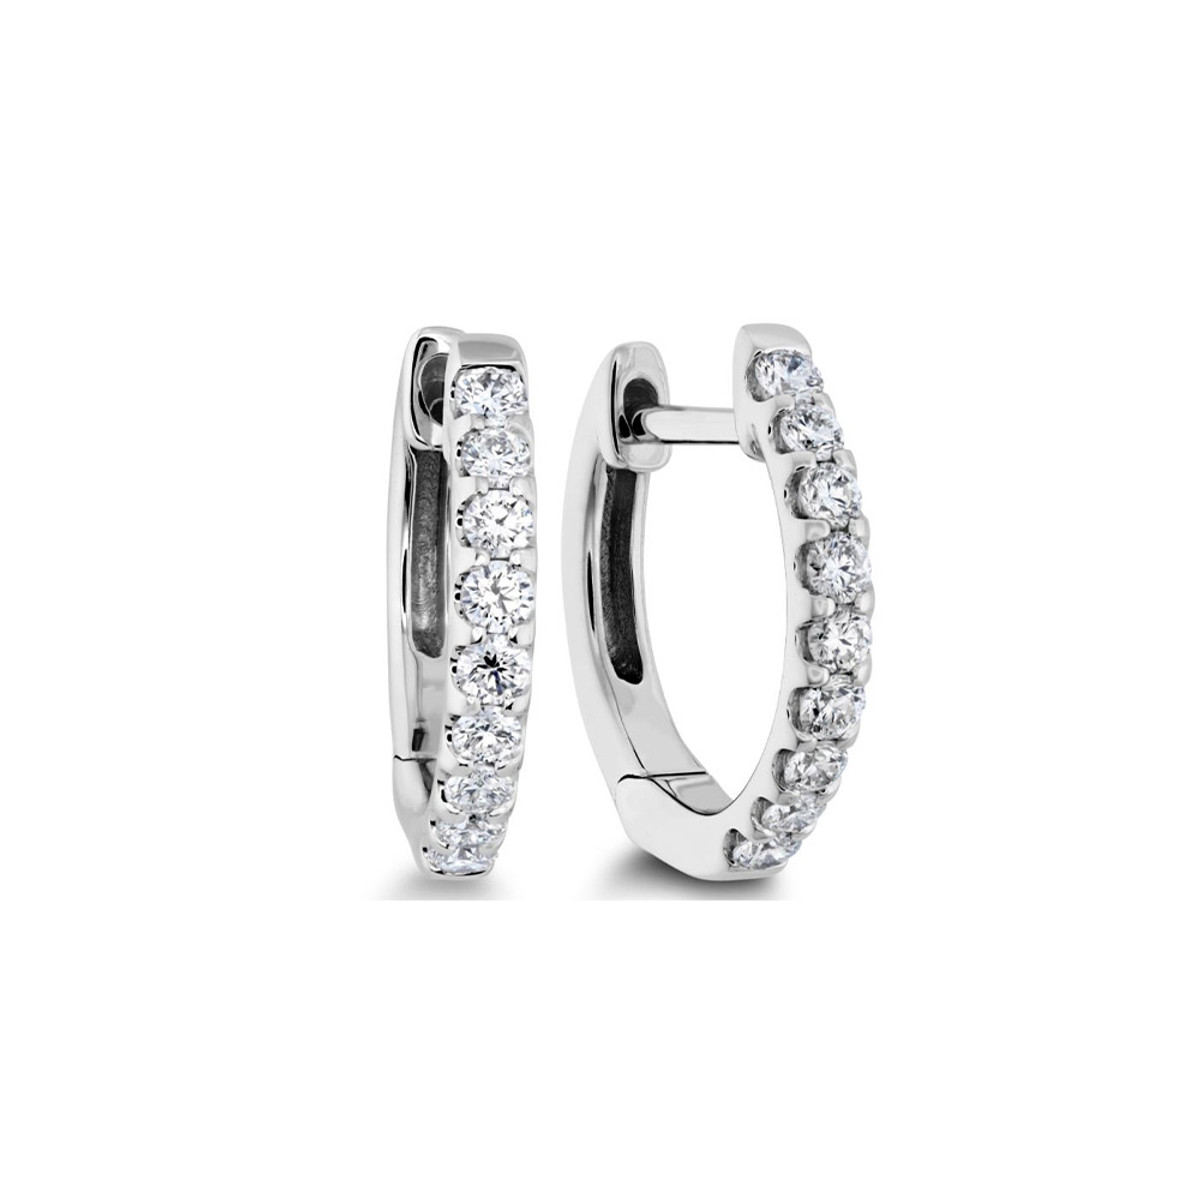 Hyde Park Collection 18K White Gold Diamond Hoop Earrings-30712 Product Image